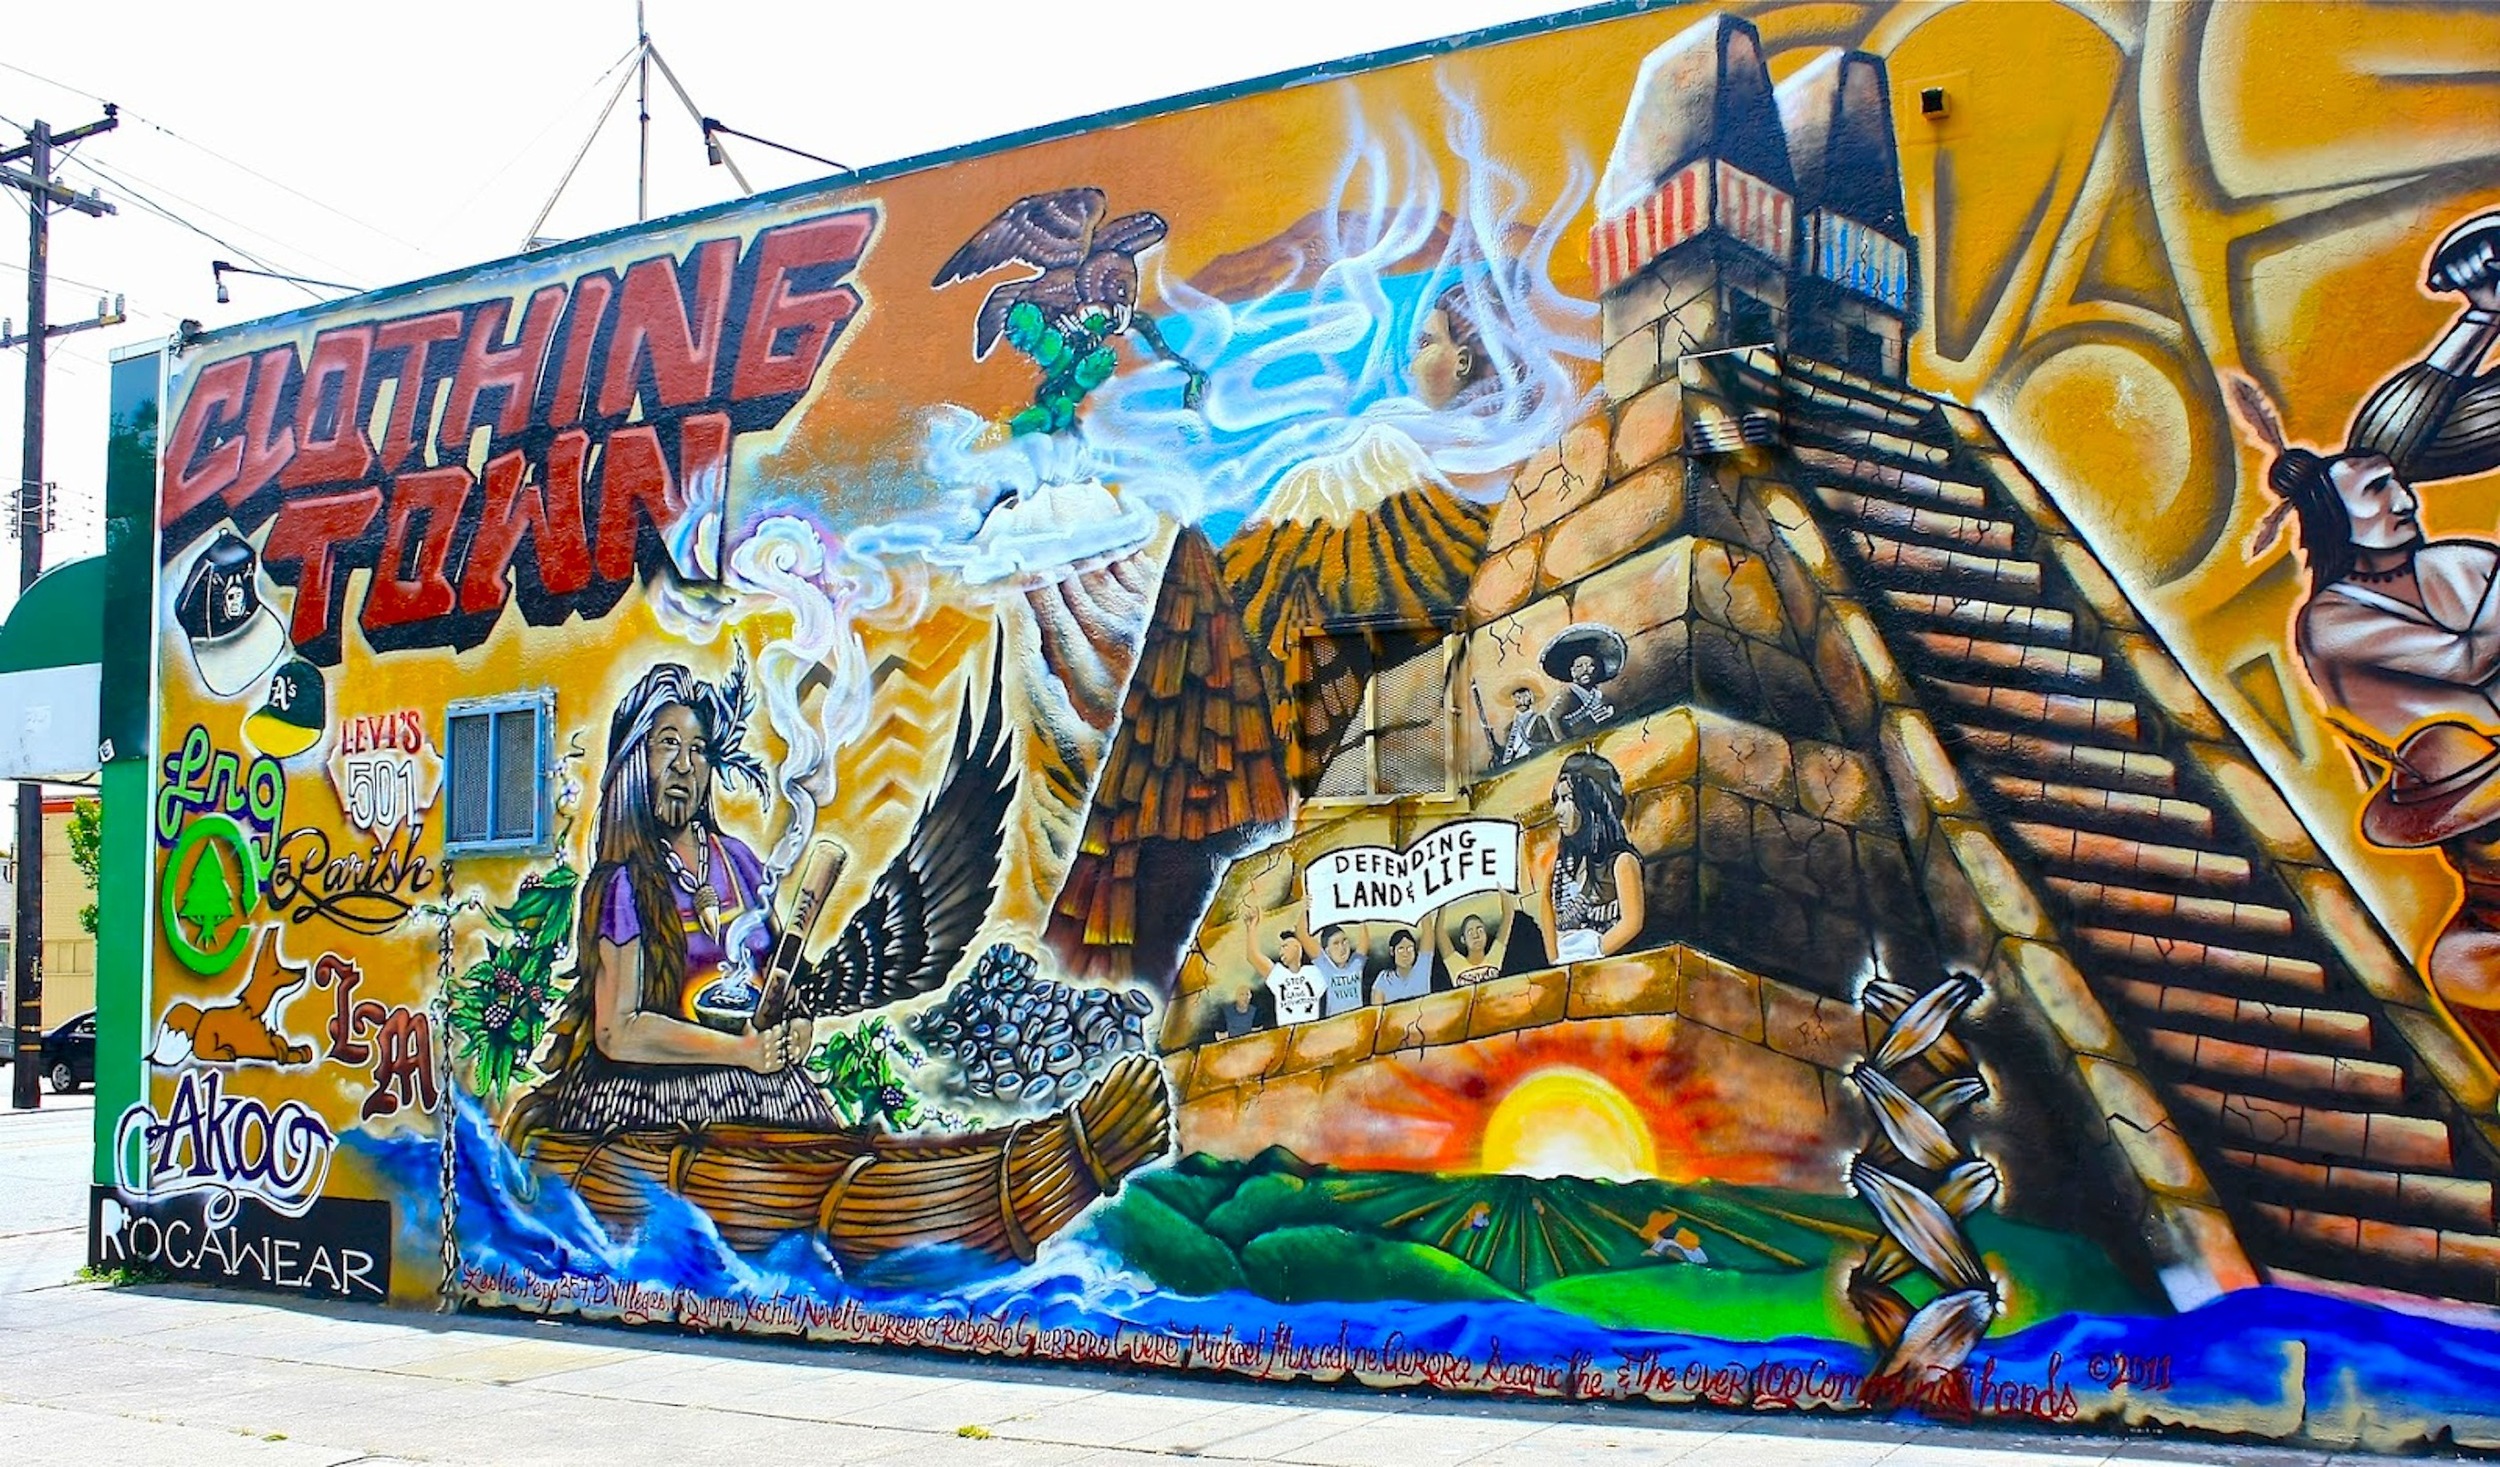  Fruitvale district, Oakland, Caifornia. Artists: Visual Element staff 